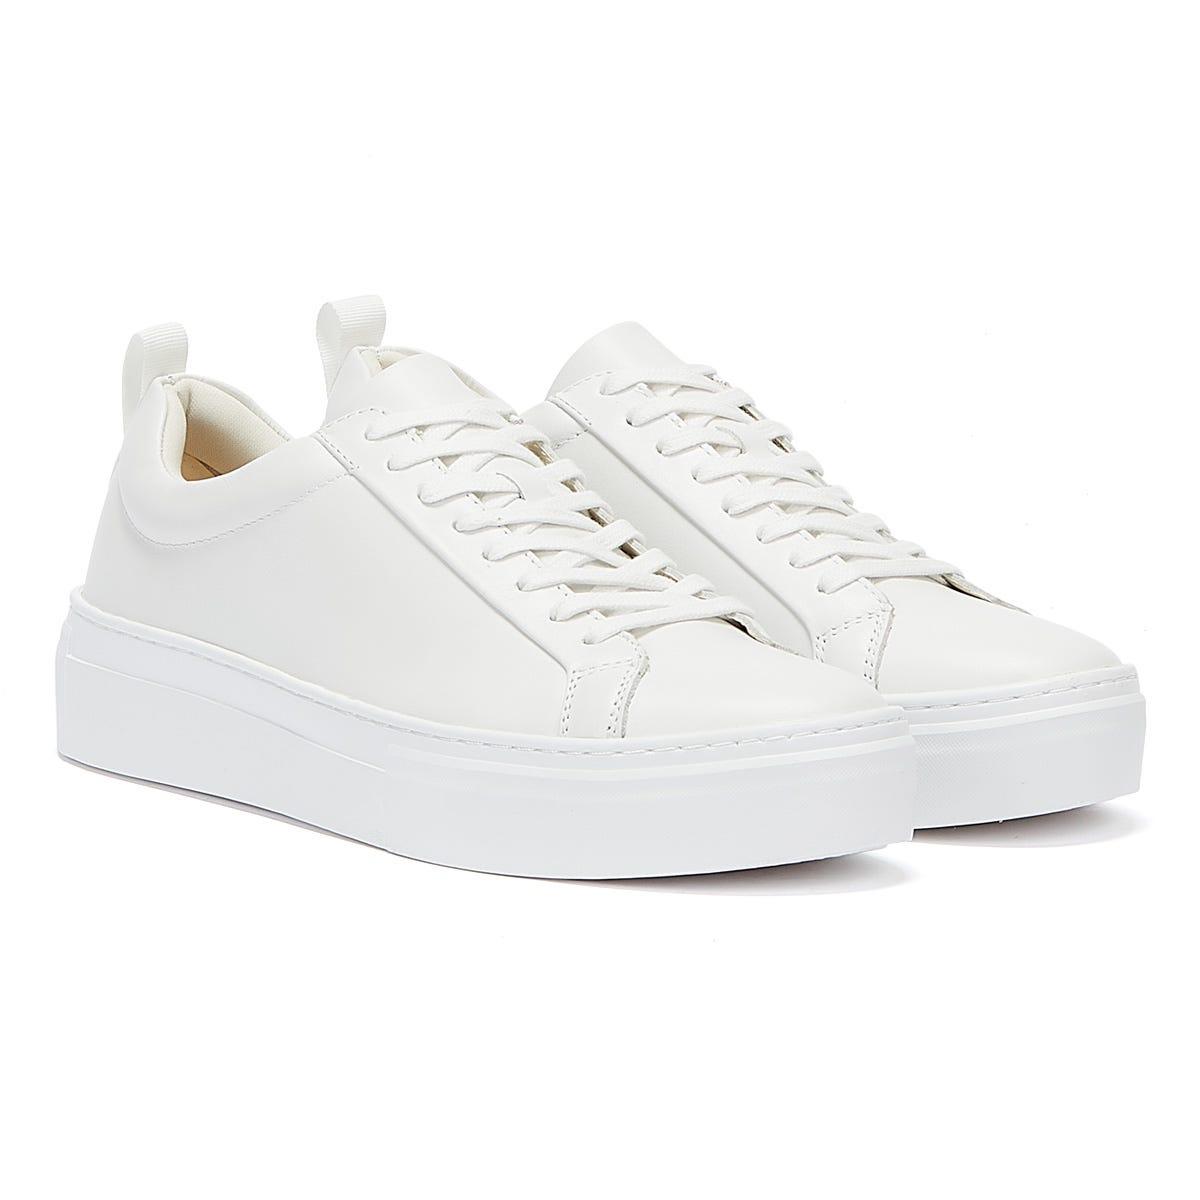 Vagabond Shoemakers Zoe Platform Lace Up Trainers in White | Lyst UK